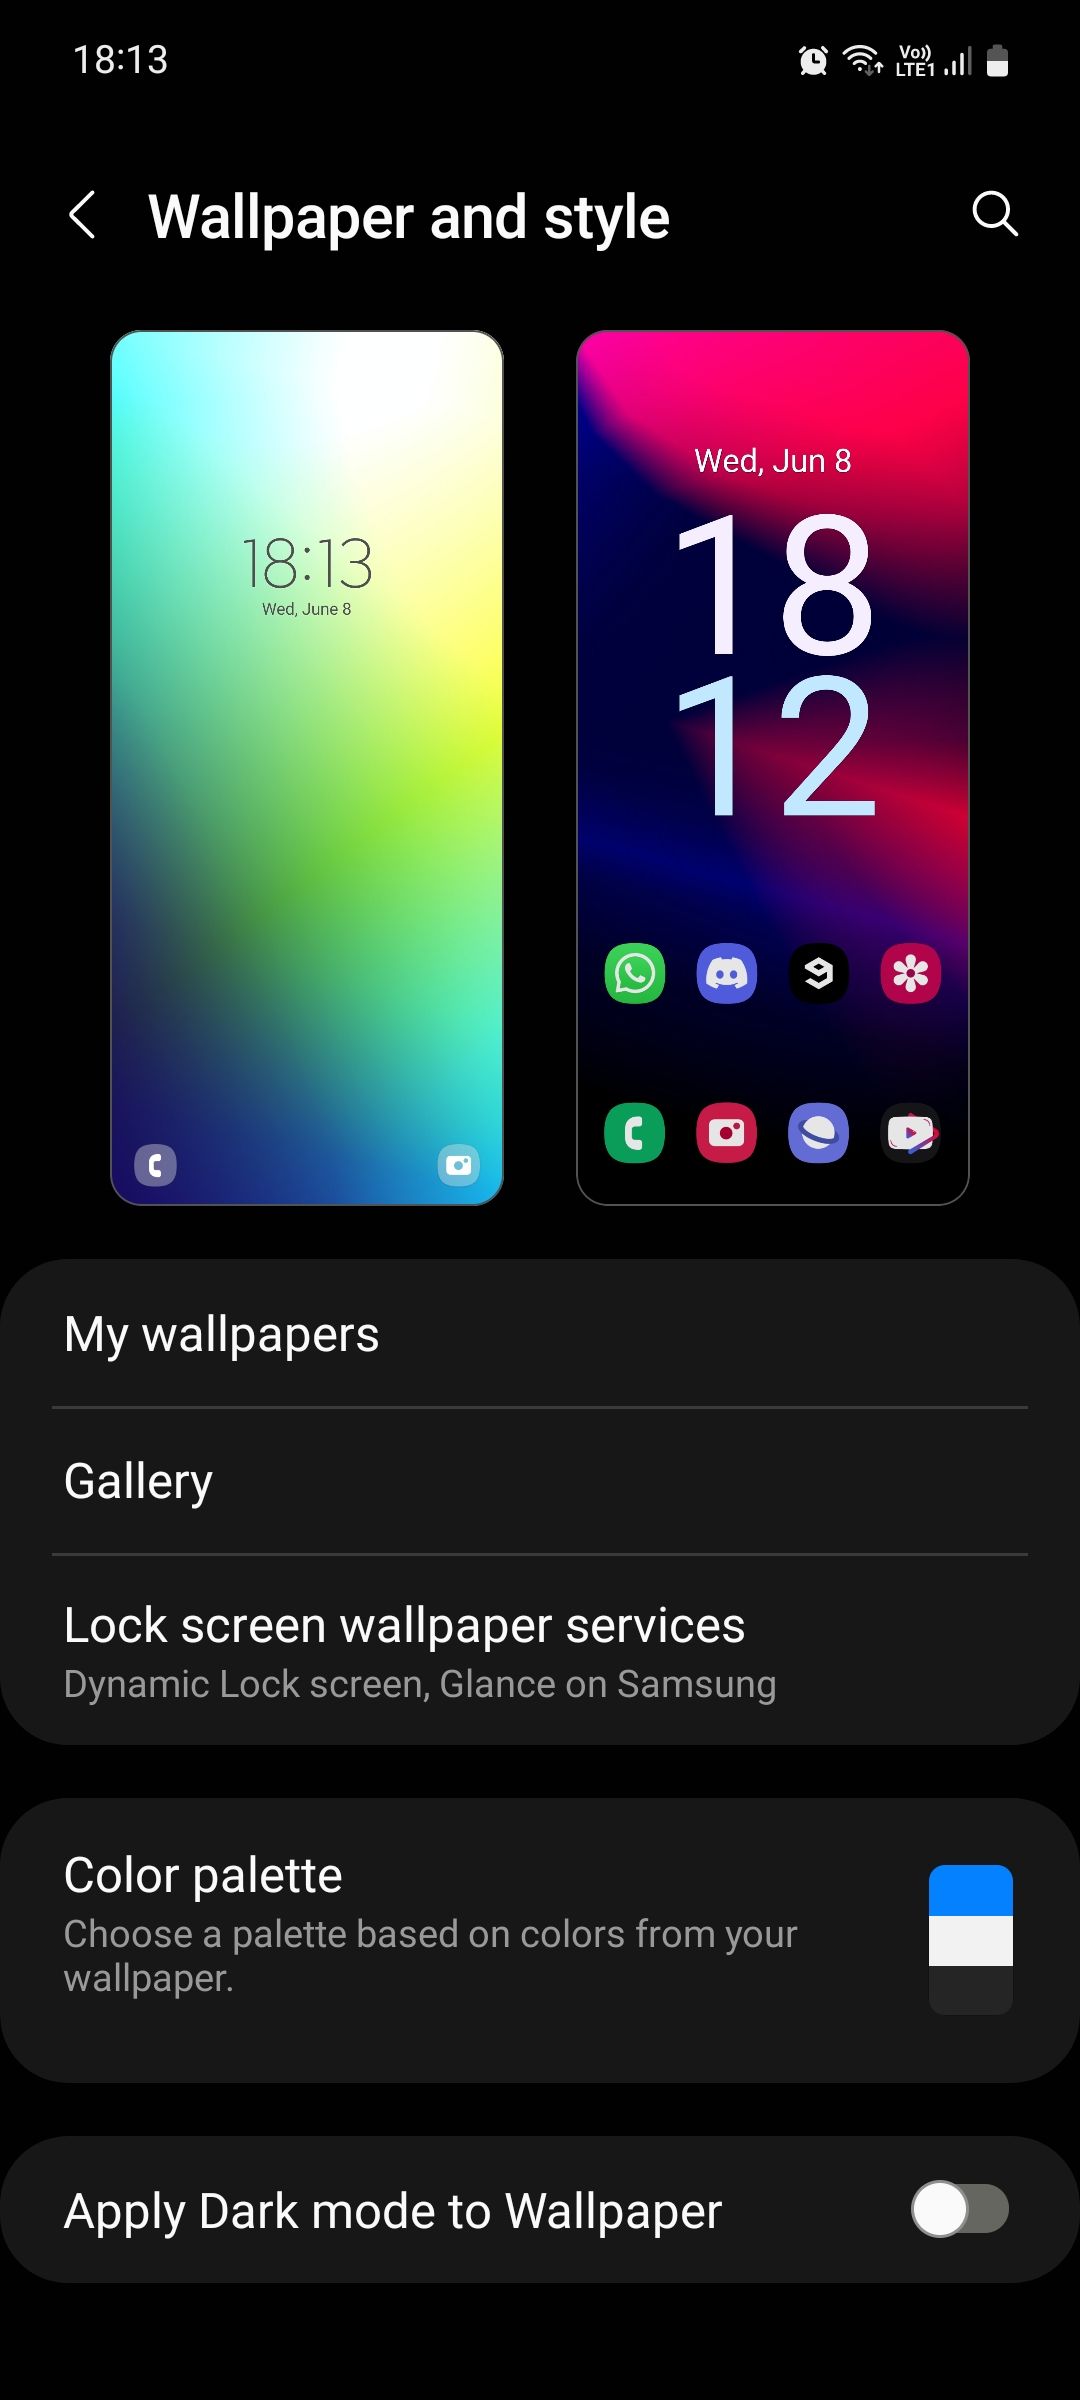 Samsung One UI wallpaper and style menu